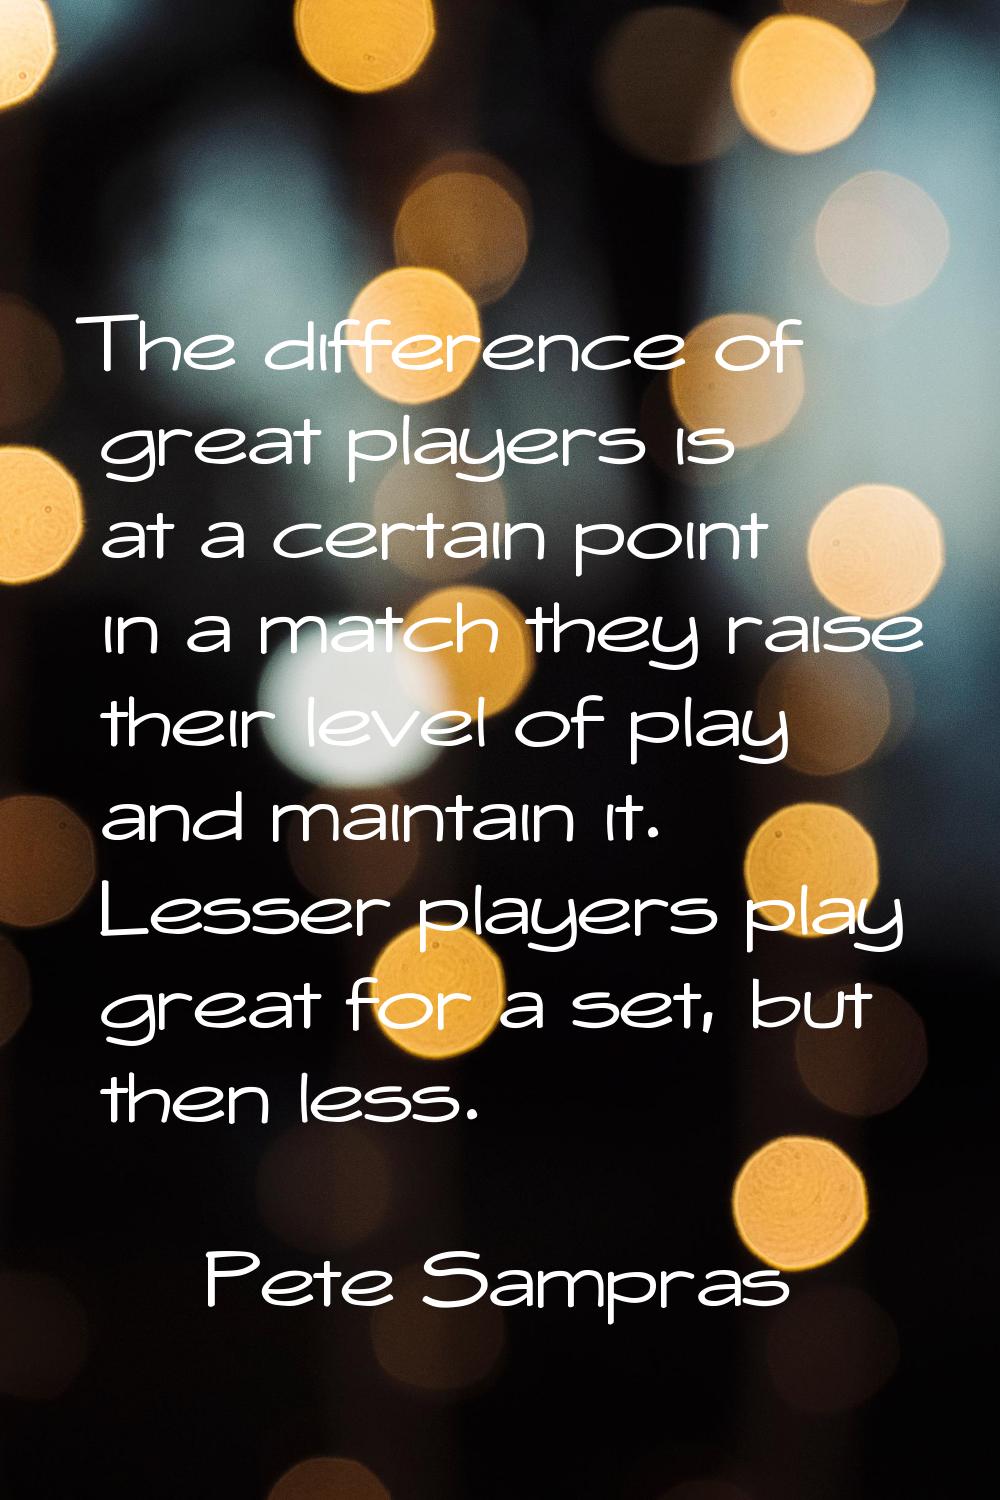 The difference of great players is at a certain point in a match they raise their level of play and